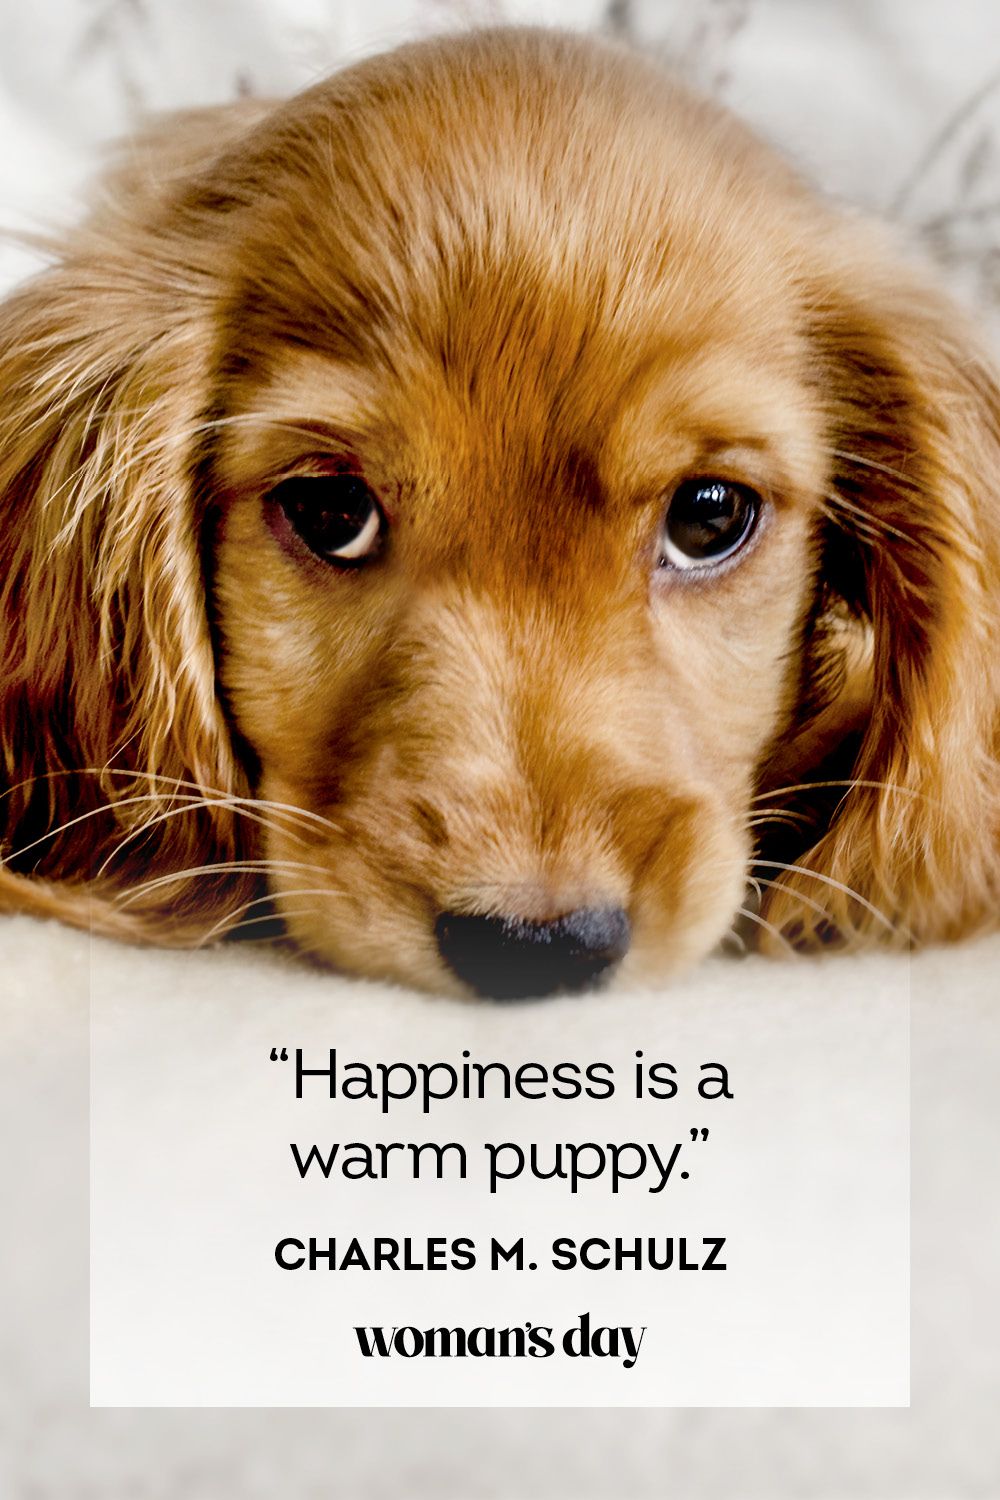 37 Best Dog Quotes - Inspirational & Funny Sayings About Dogs